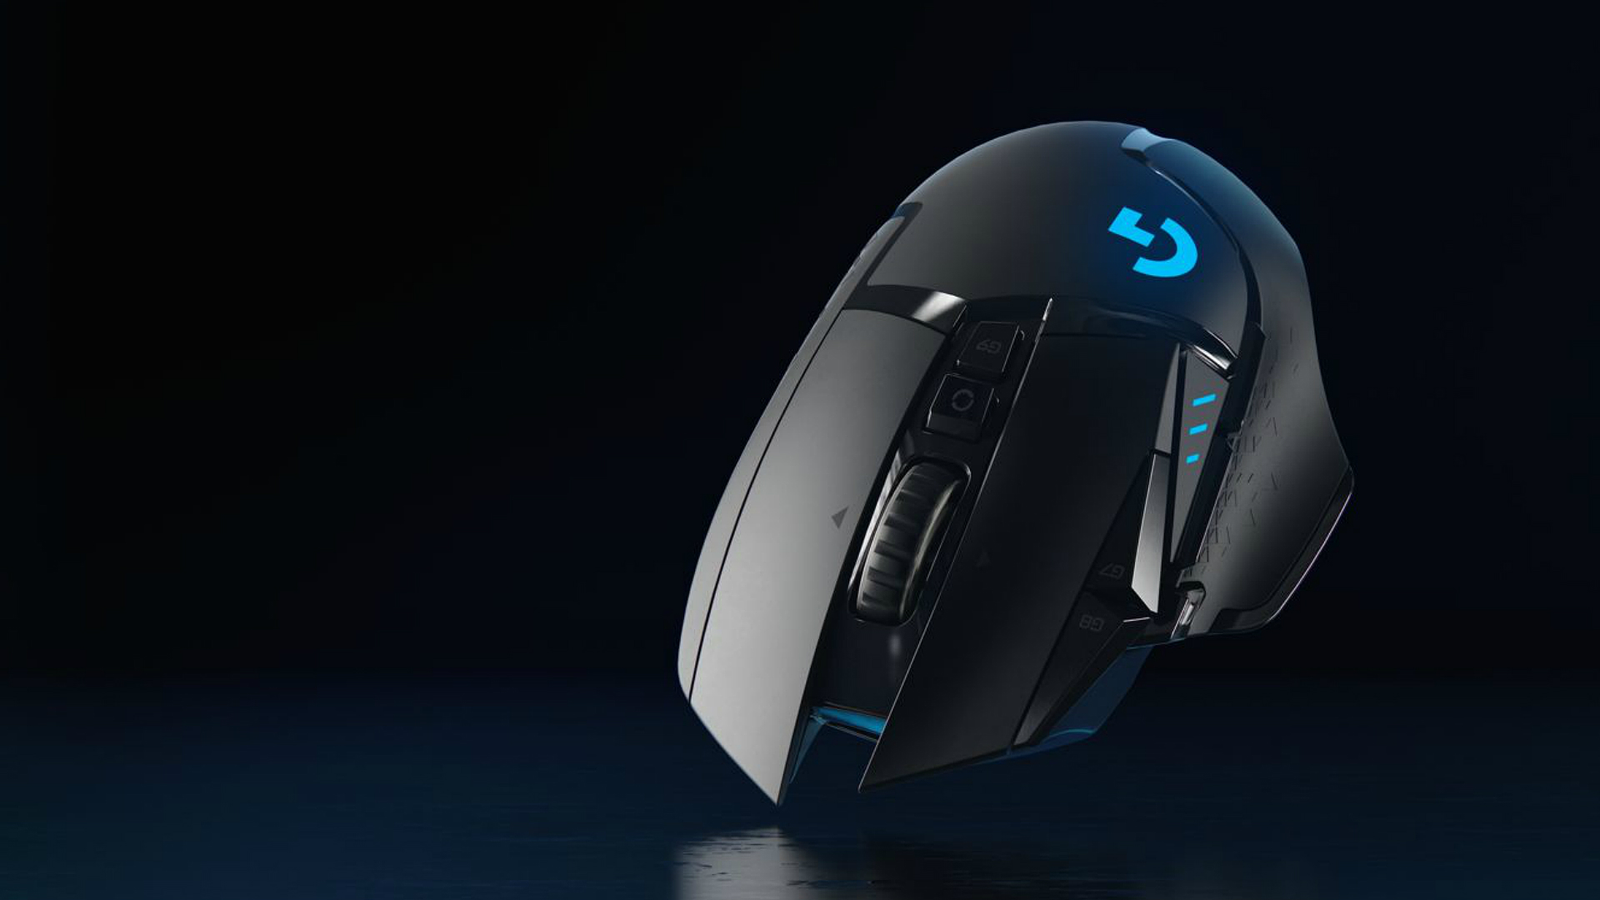 Logitech G502 Lightspeed review: The iconic mouse meets Logitech's